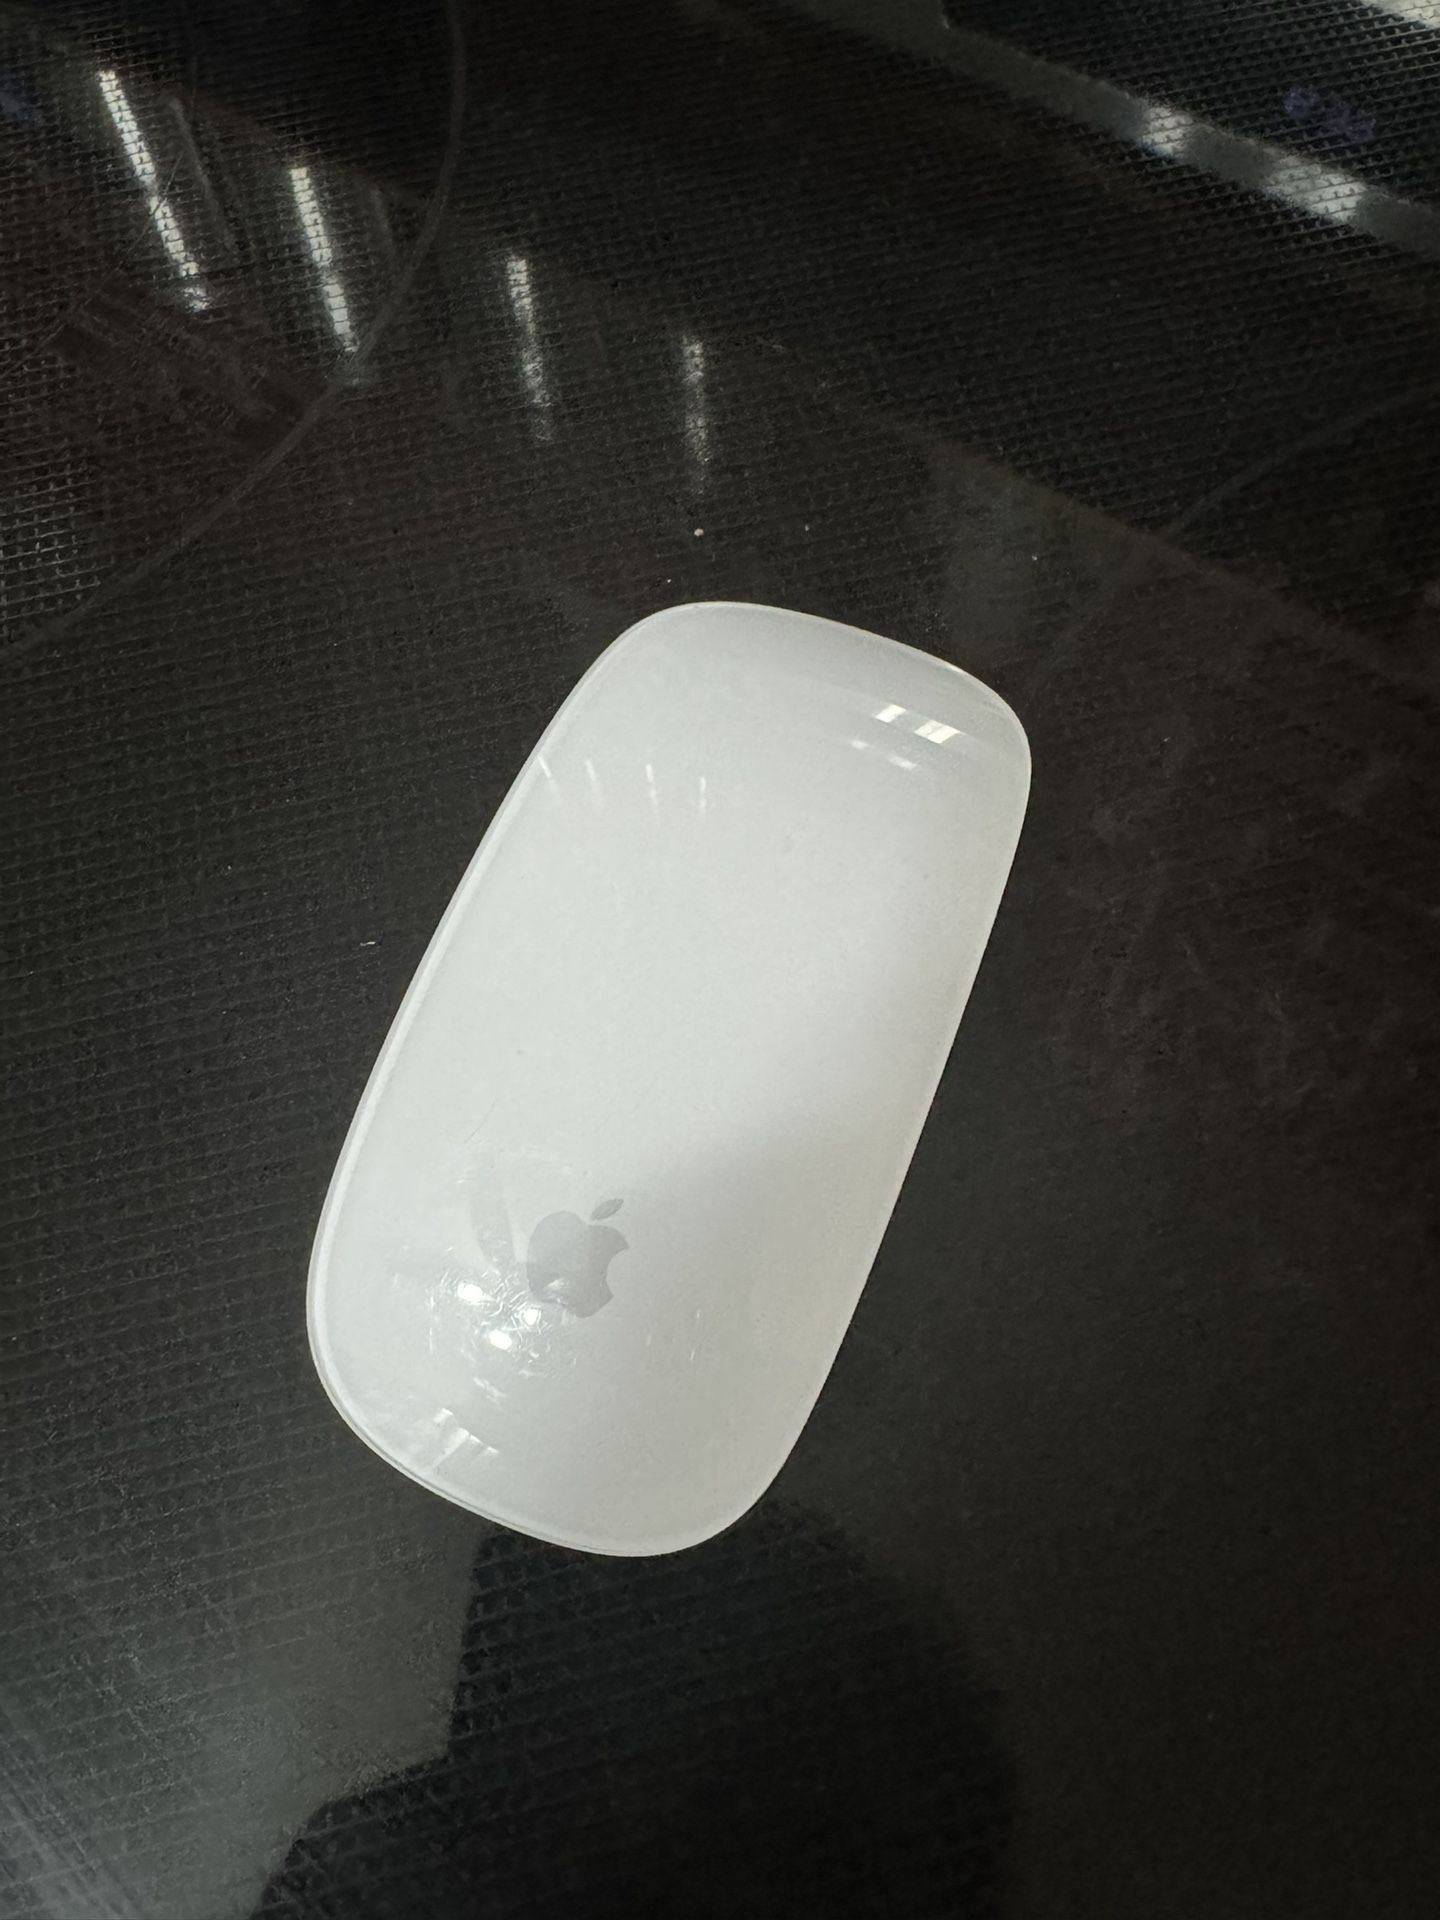 Magic mouse 2 And Keyboard